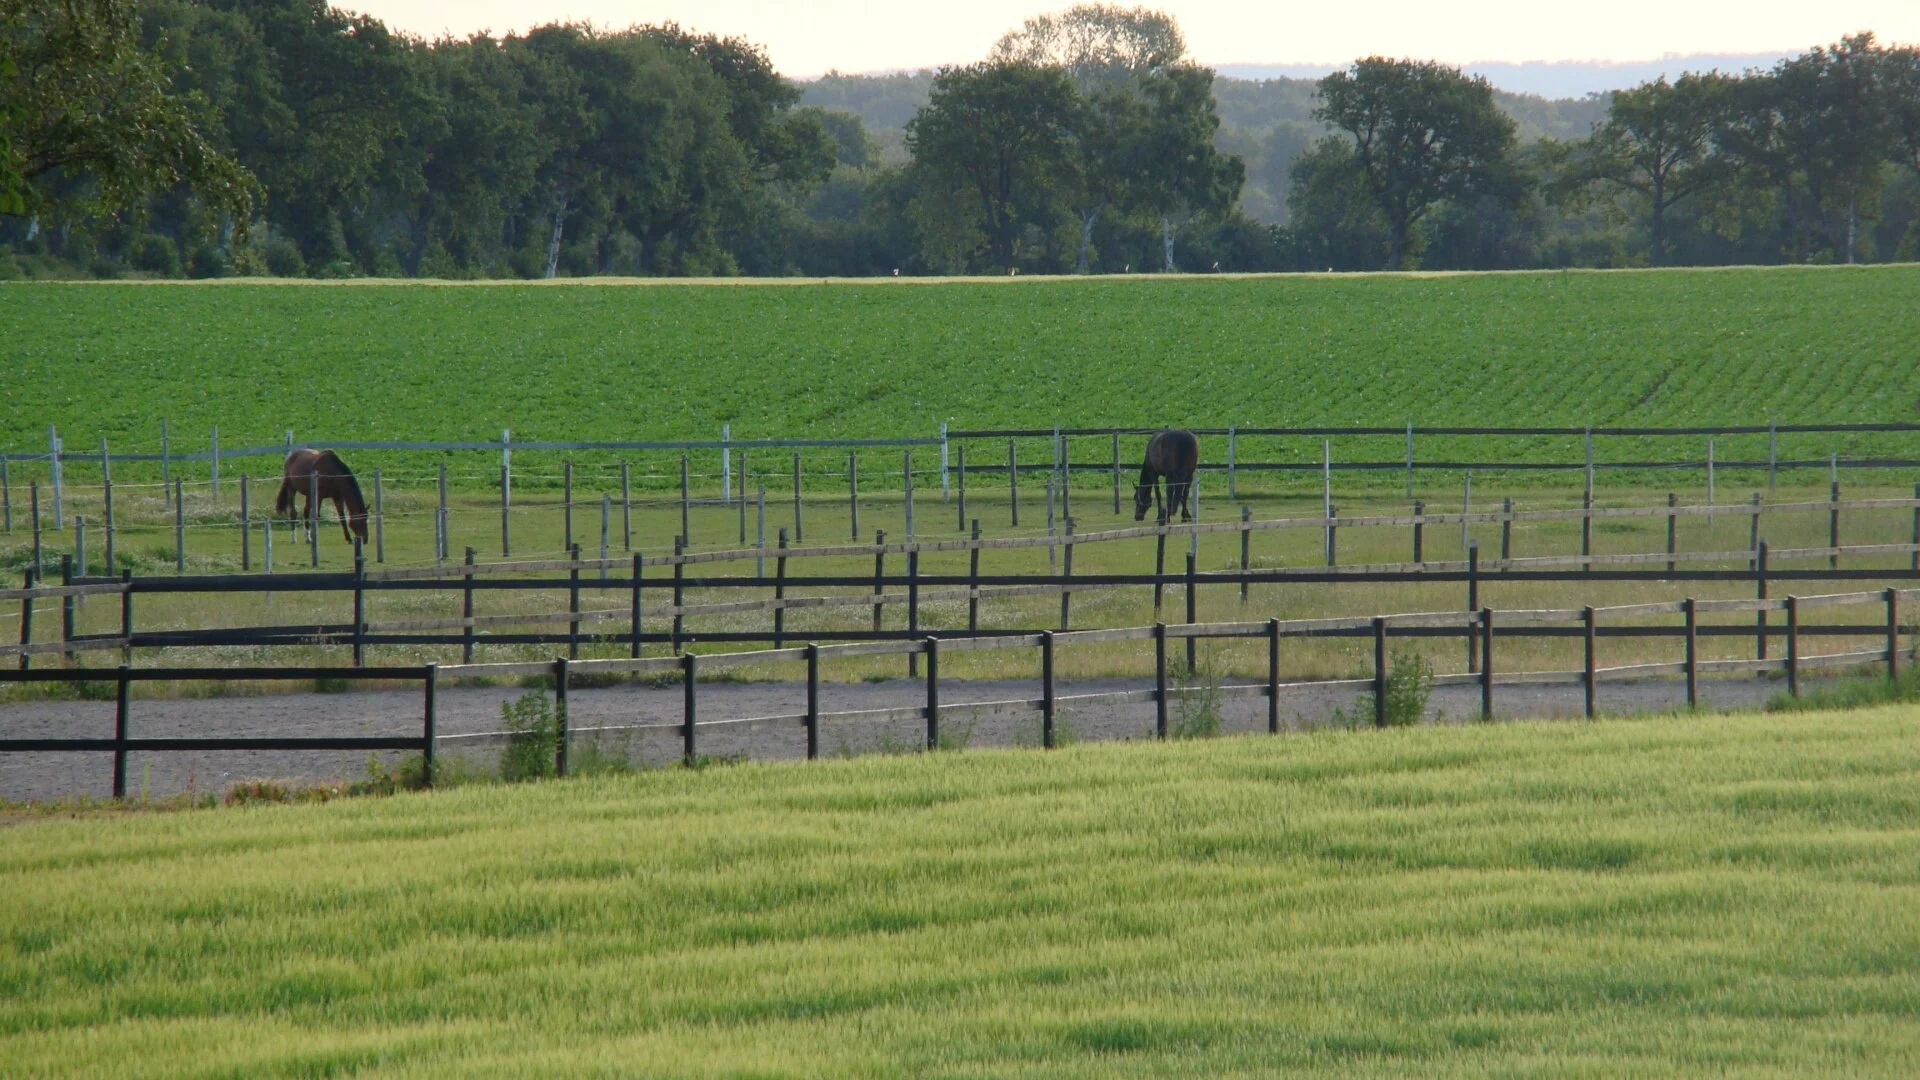 Horses in early morning